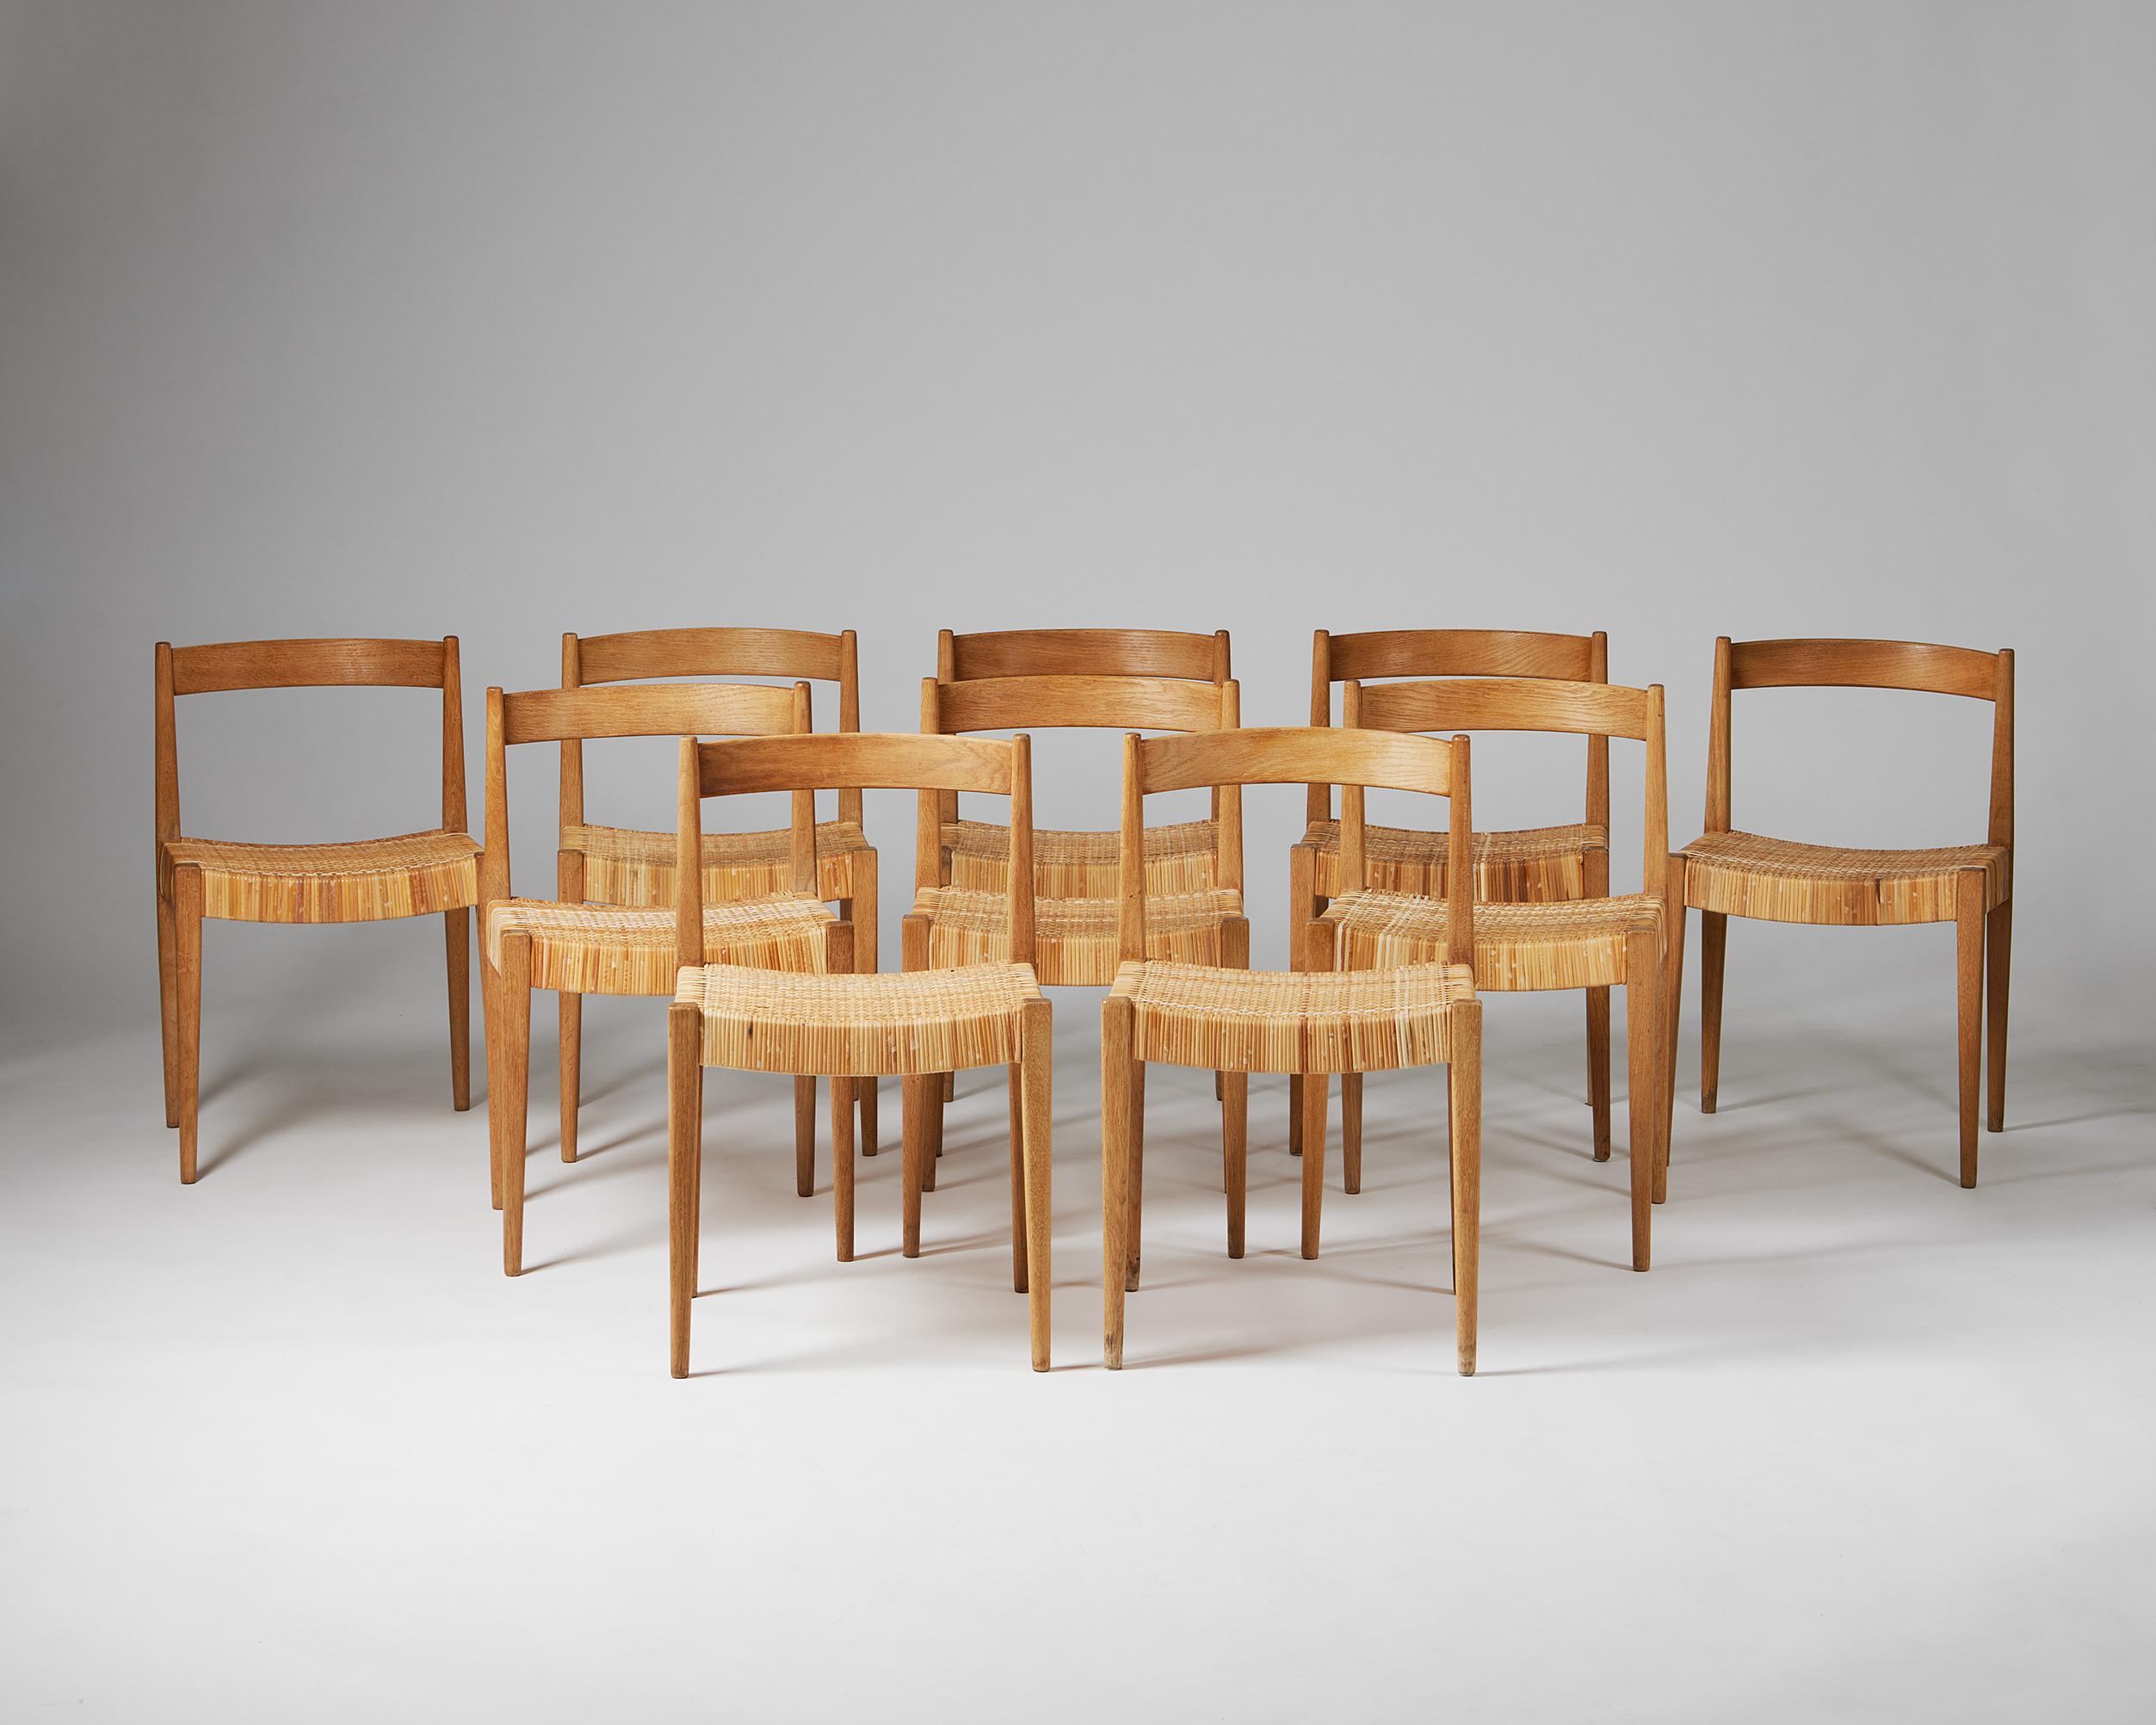 Set of ten dining chairs designed by Nanna and Jorgen Ditzel for Poul Kolds Sawmill,
Denmark. 1955.
Oak and rattan.

Measures: H: 70 cm / 2' 3 3/4